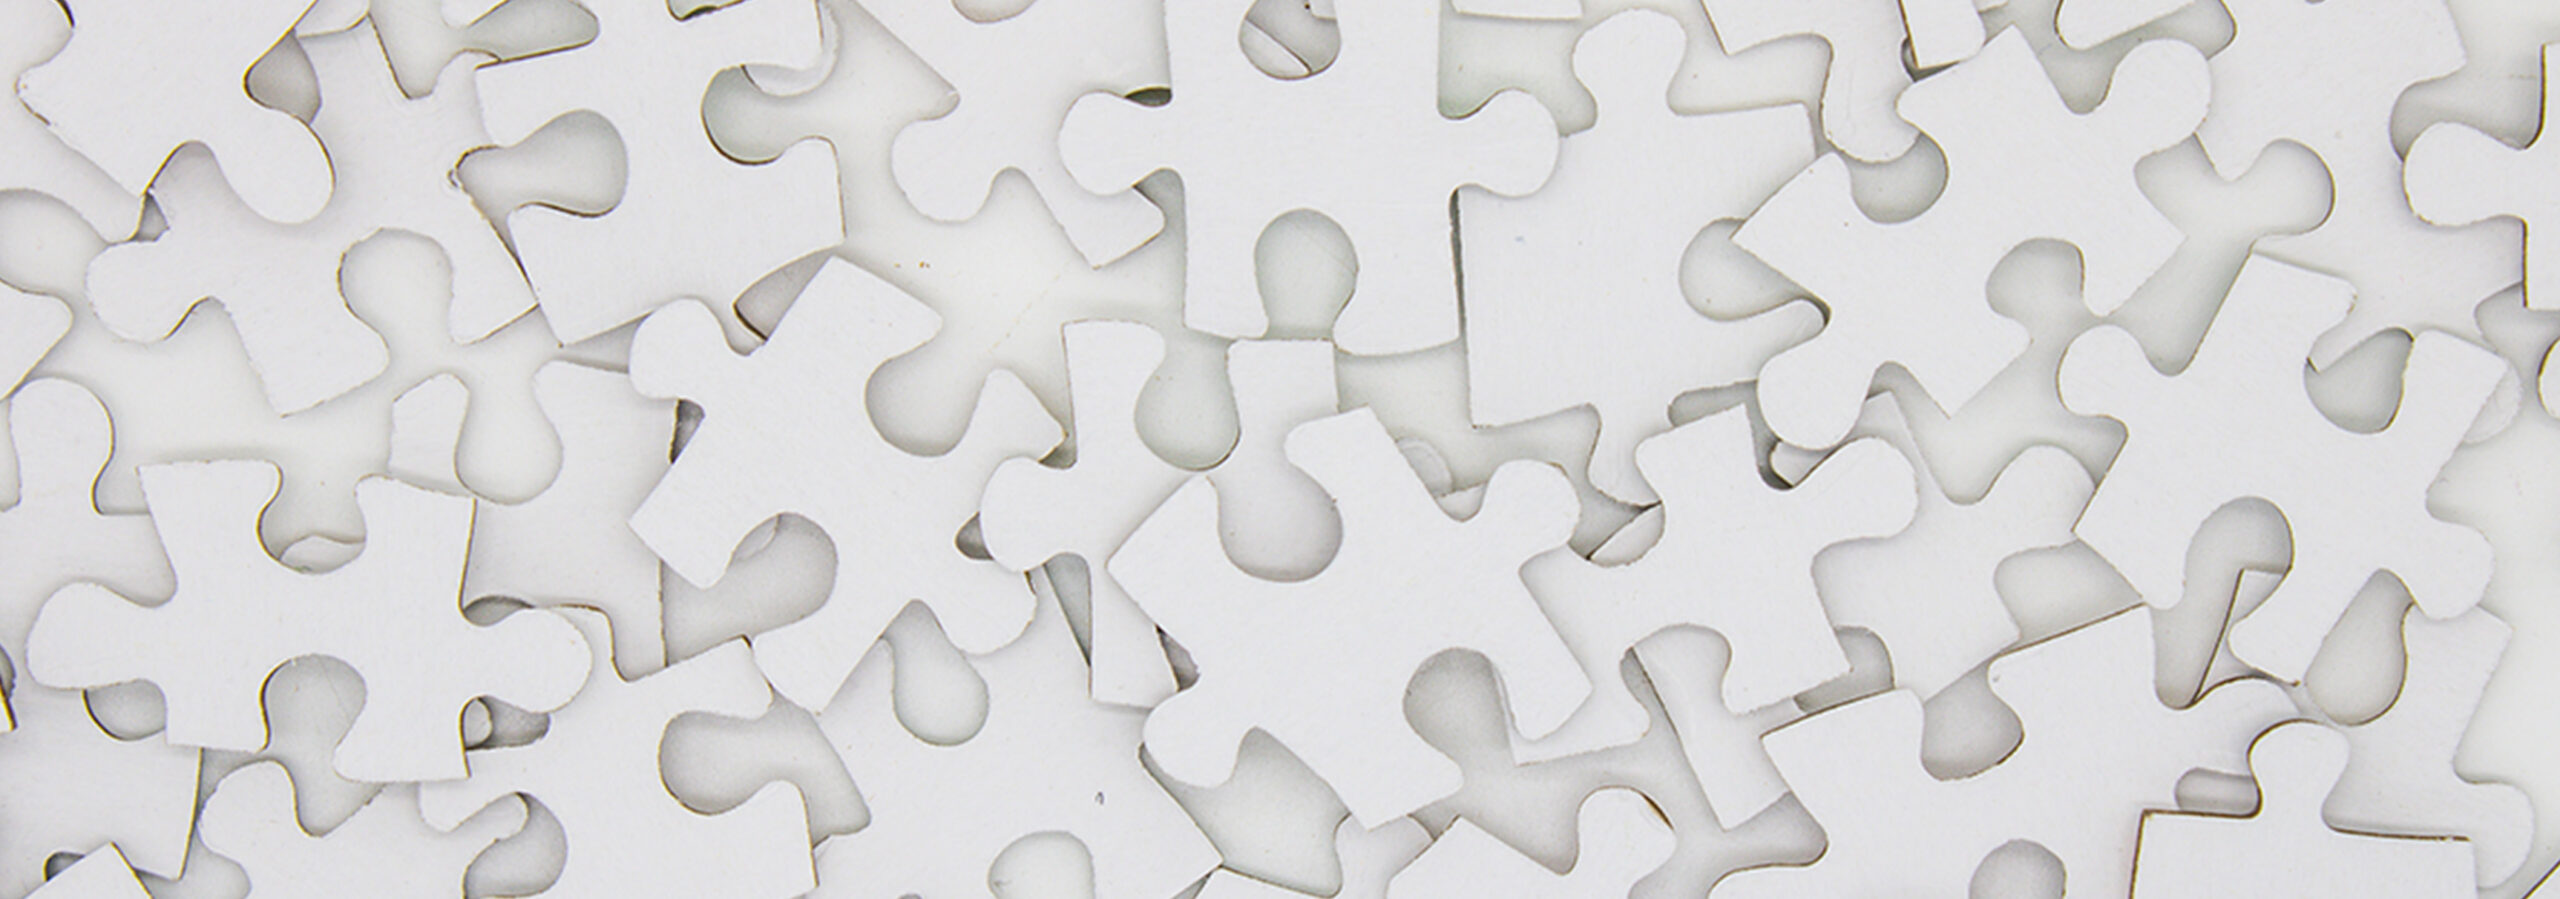 Microservices puzzle pieces image